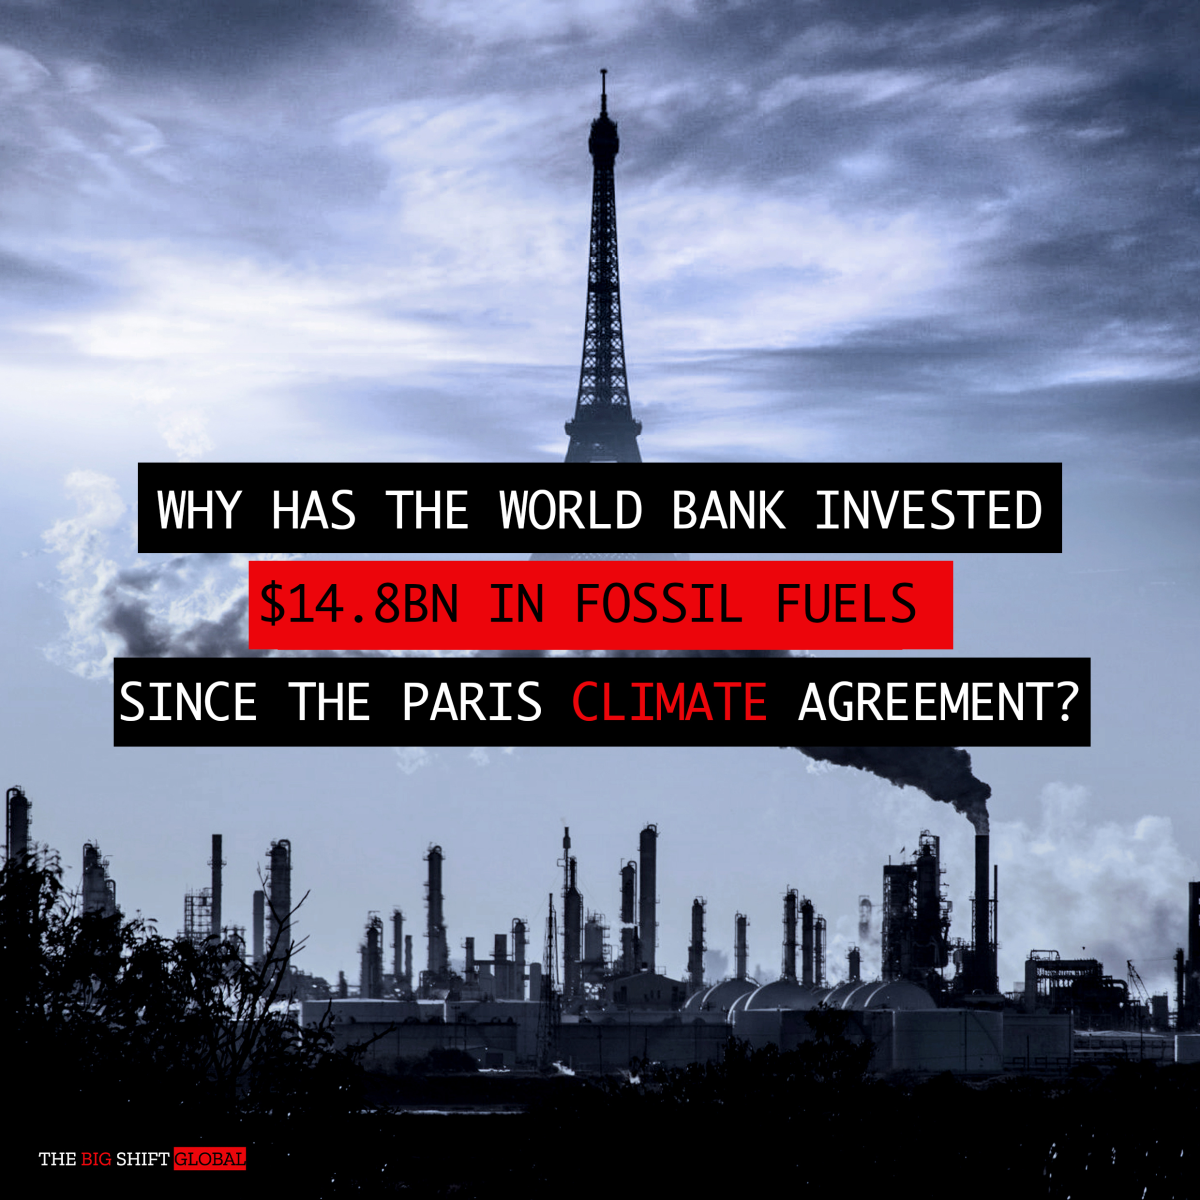 14.8bn in FF since the Paris Agreement